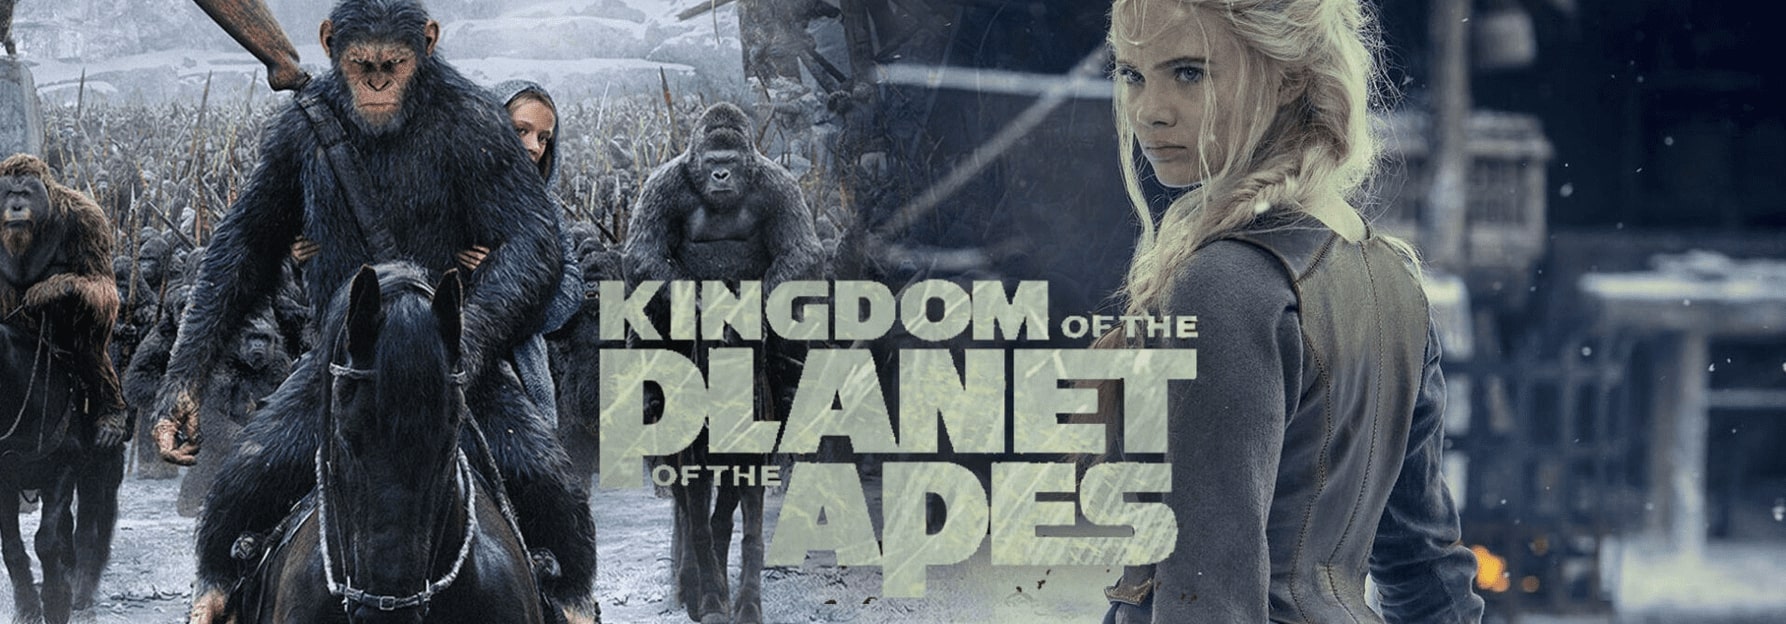 Kingdom of the Apes Banner